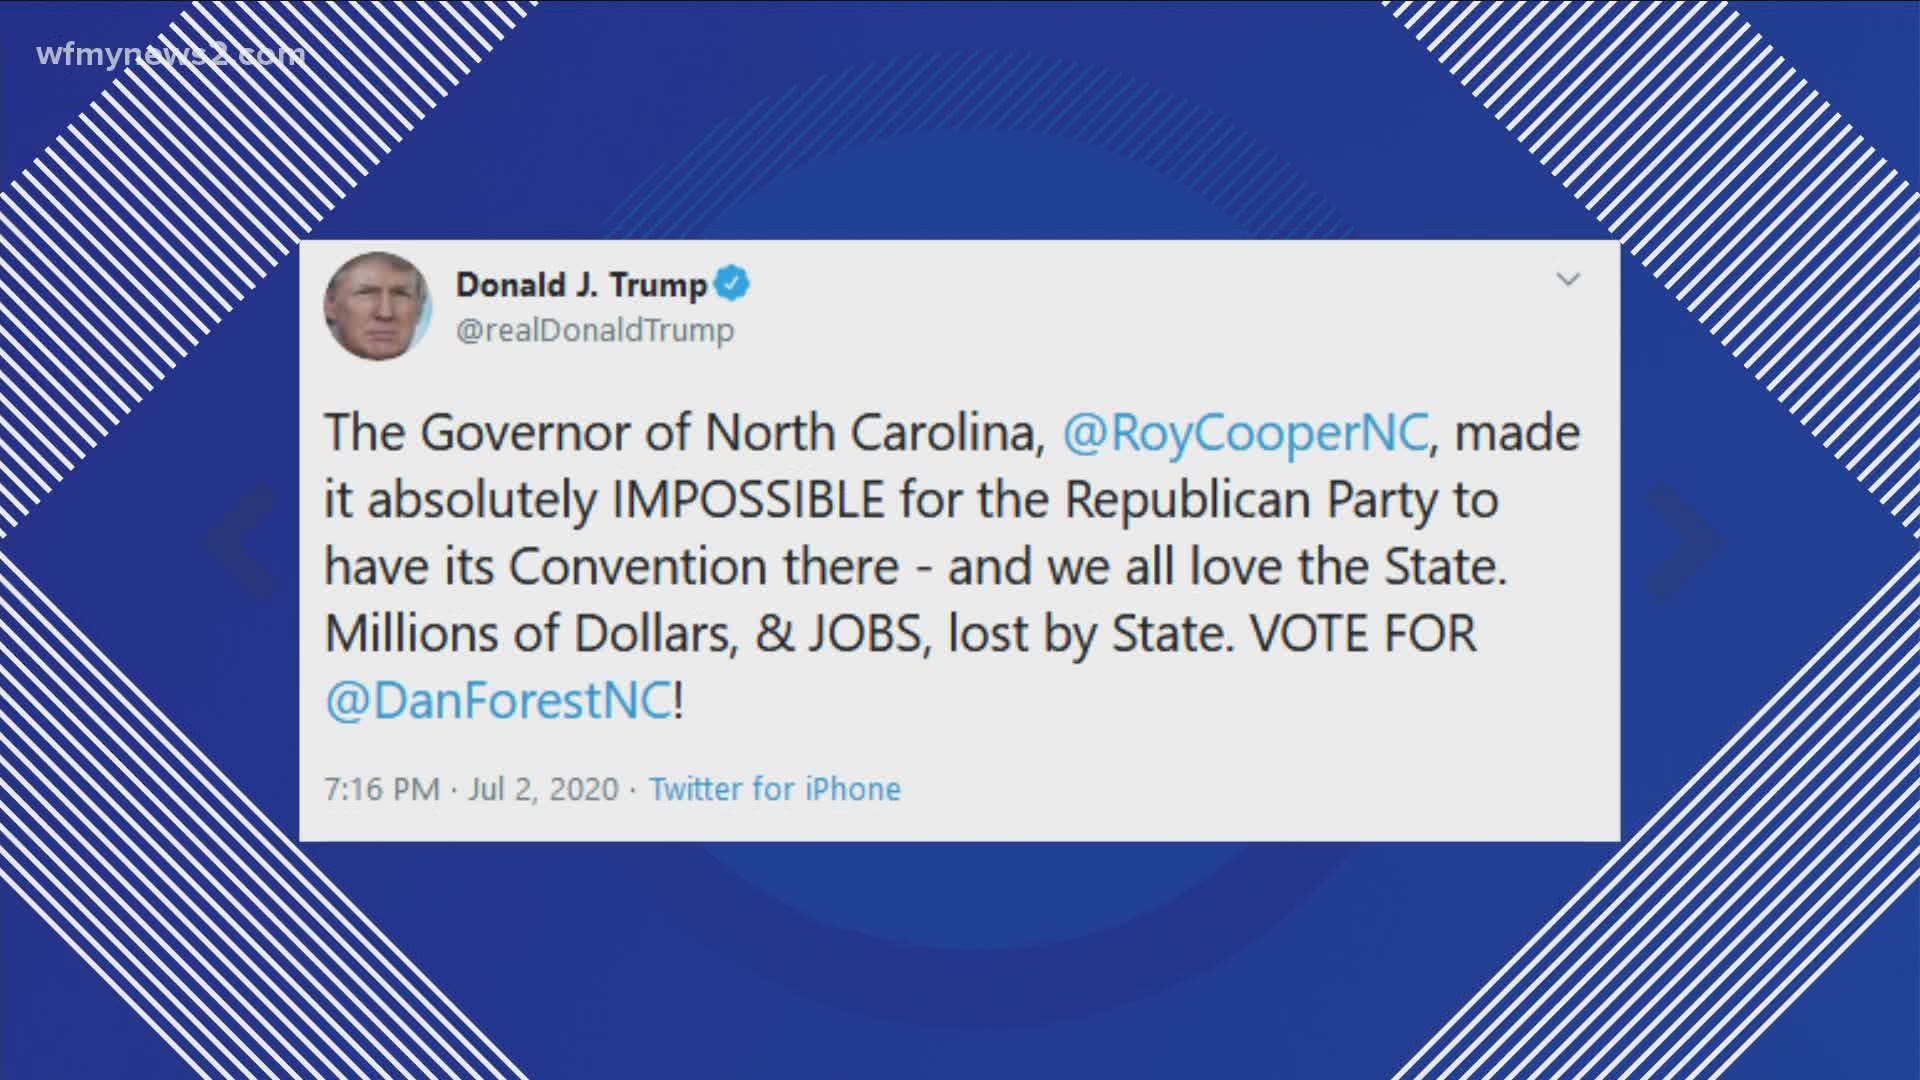 The RNC moved to Jacksonville, Florida, and President Trump supported the move due to Governor Cooper’s COVID-19 restrictions.